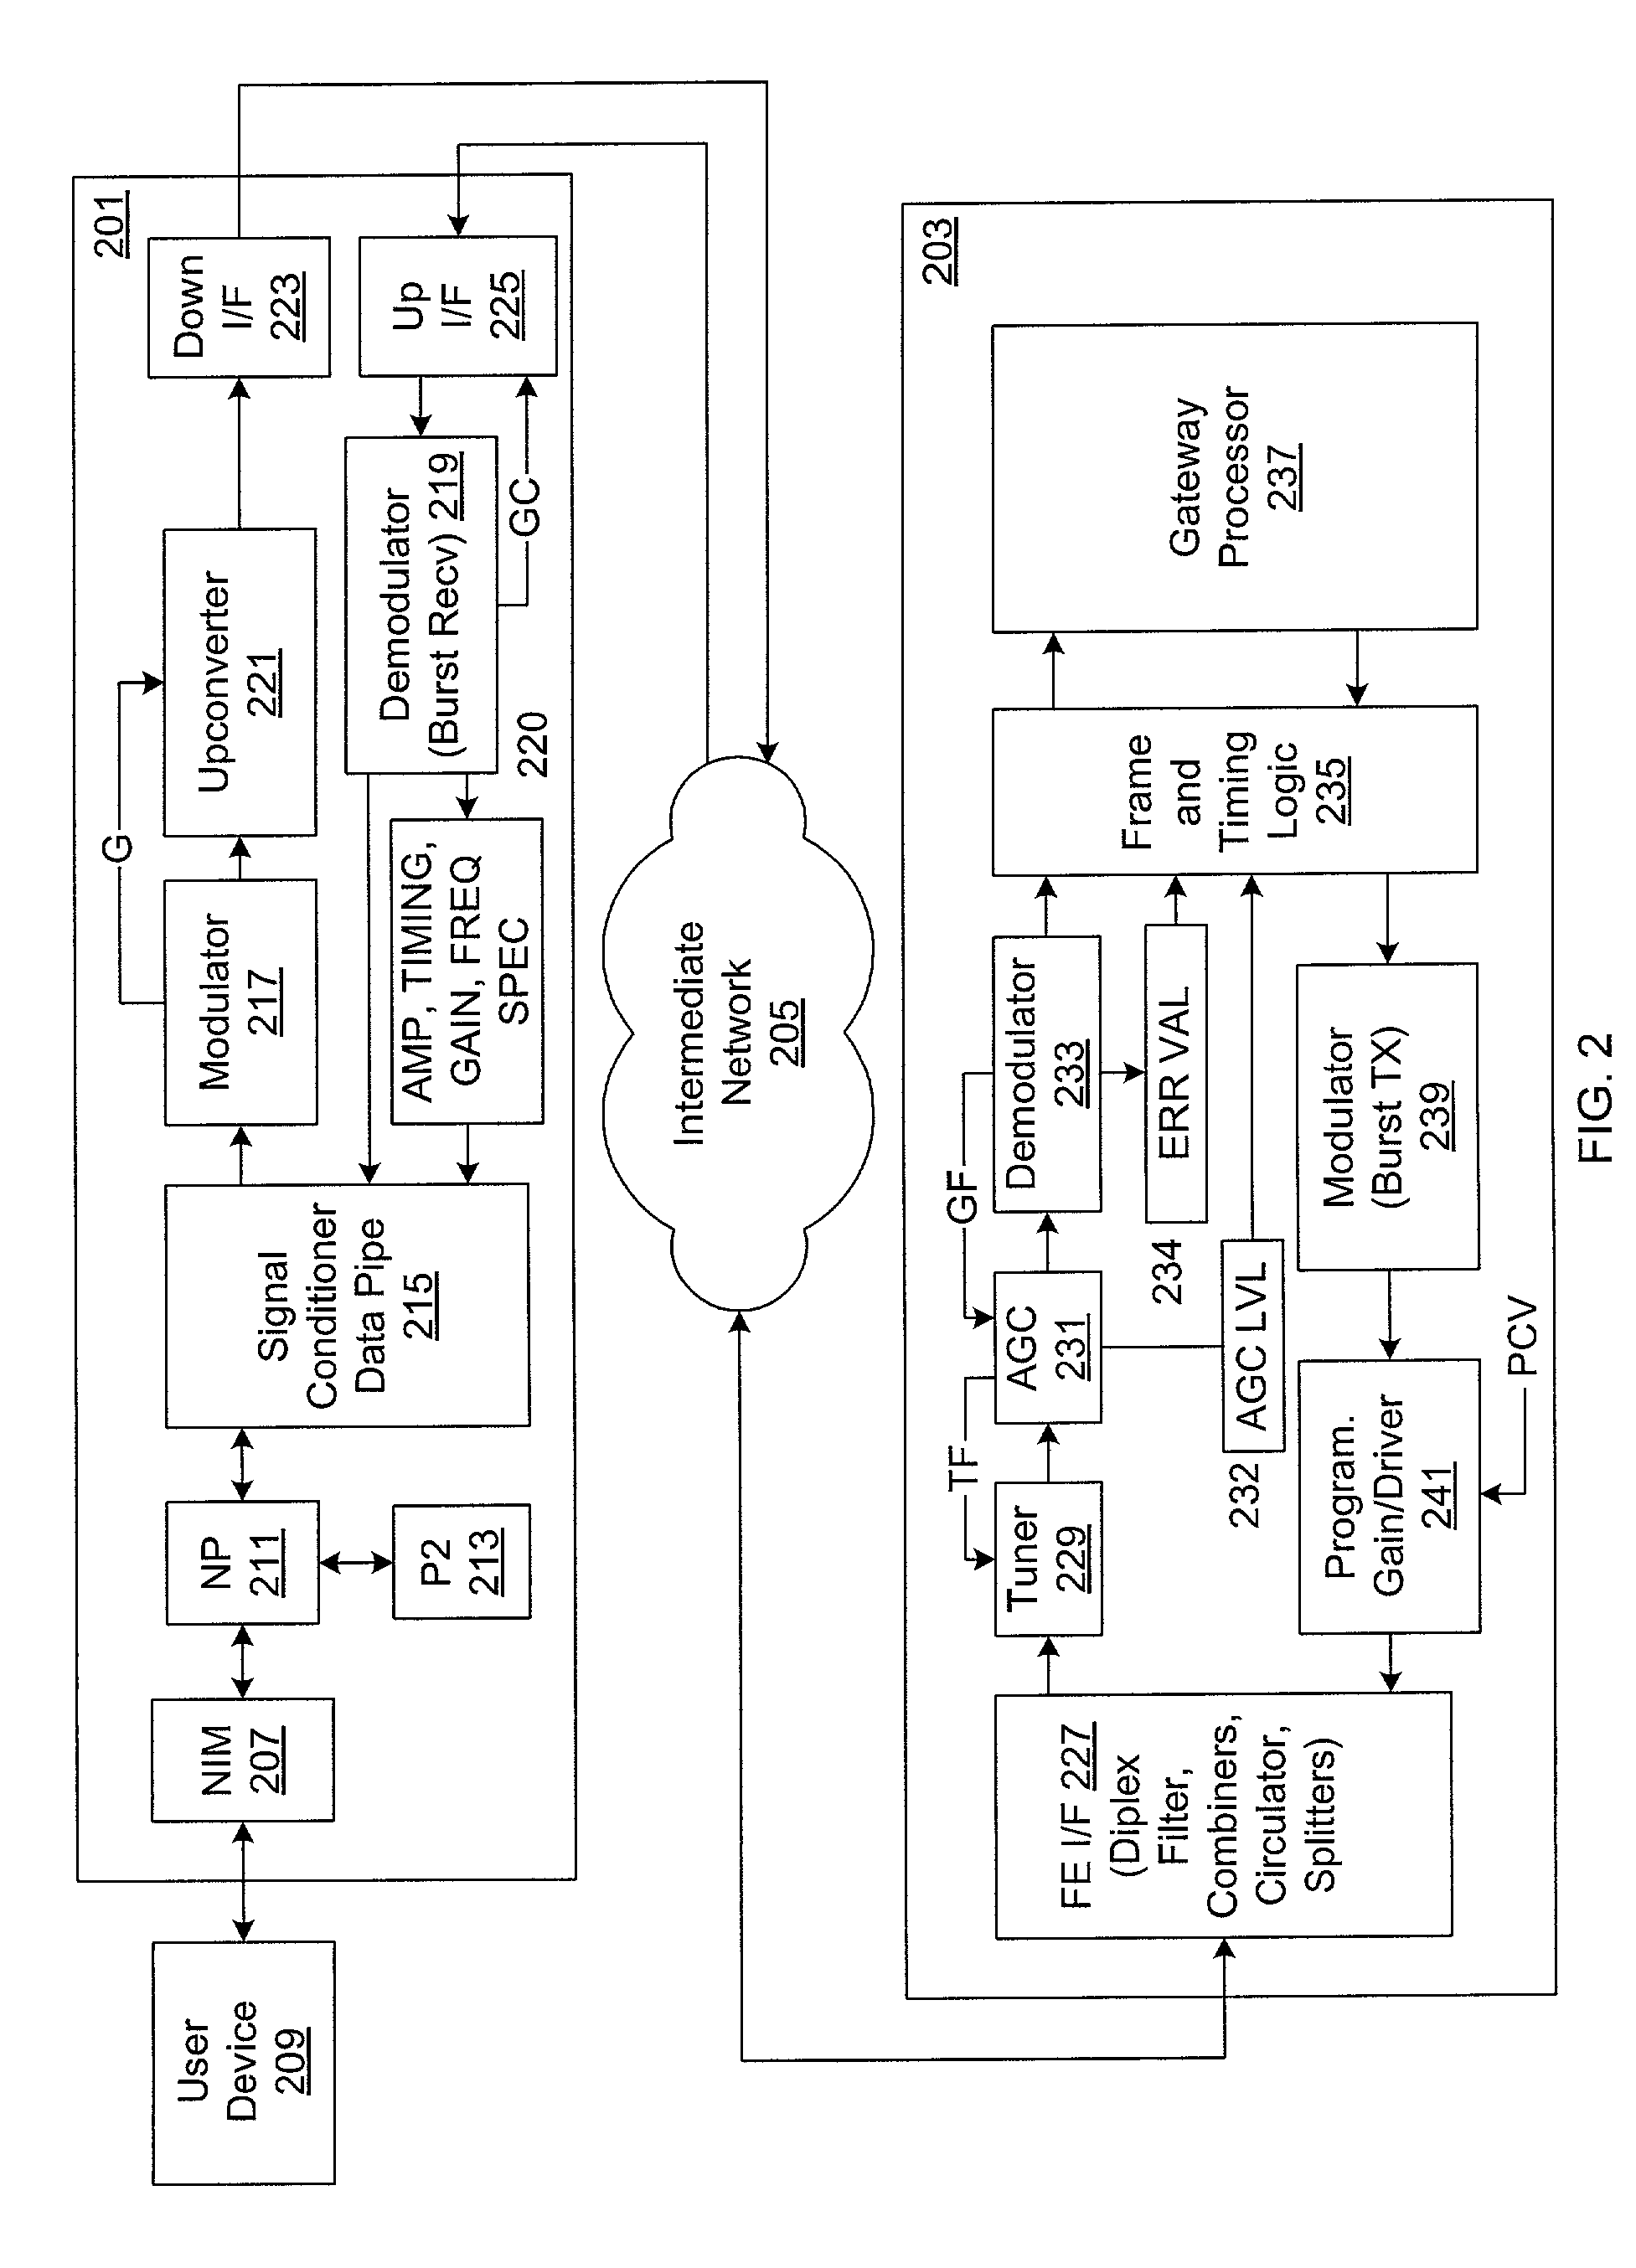 Radio frequency characterization of cable plant and corresponding calibration of communication equipment communicating via the cable plant